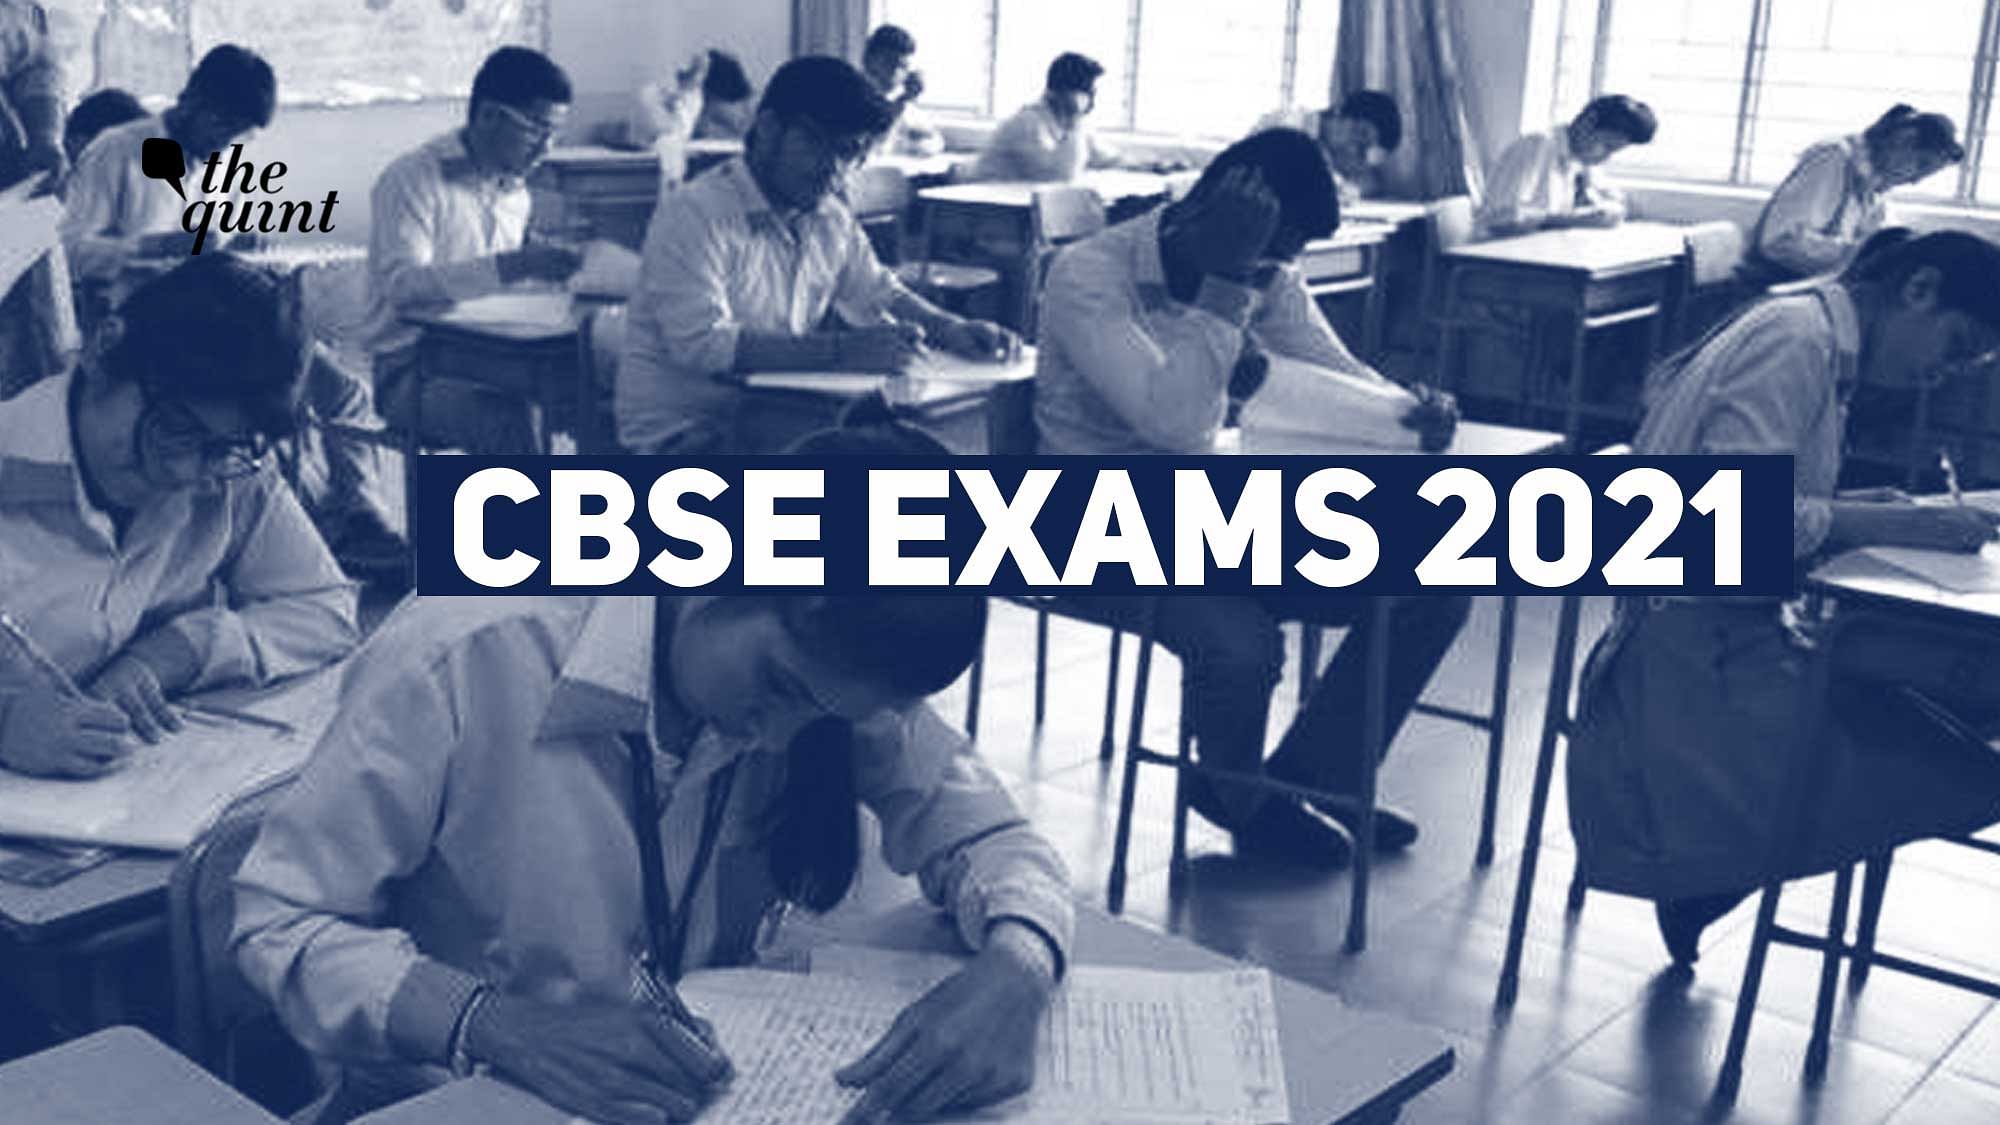 CBSE Class-12 objective marking criteria is expected to be announced soon.